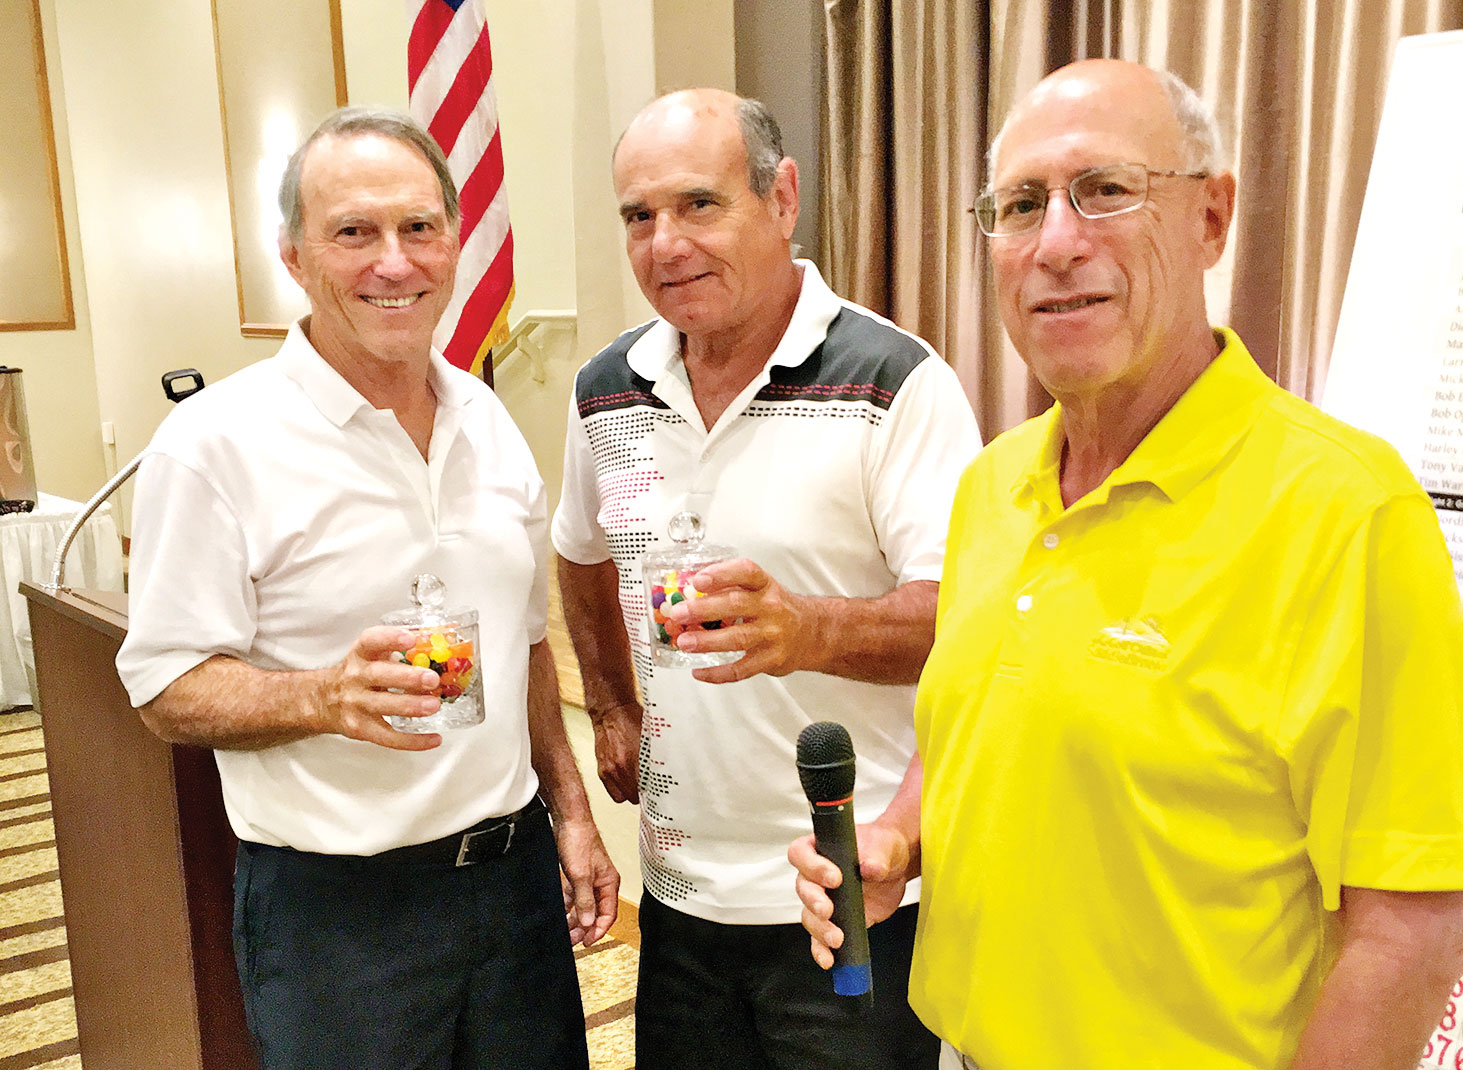 Left to right: Al Bolty, Bruce Fink and David Cohen